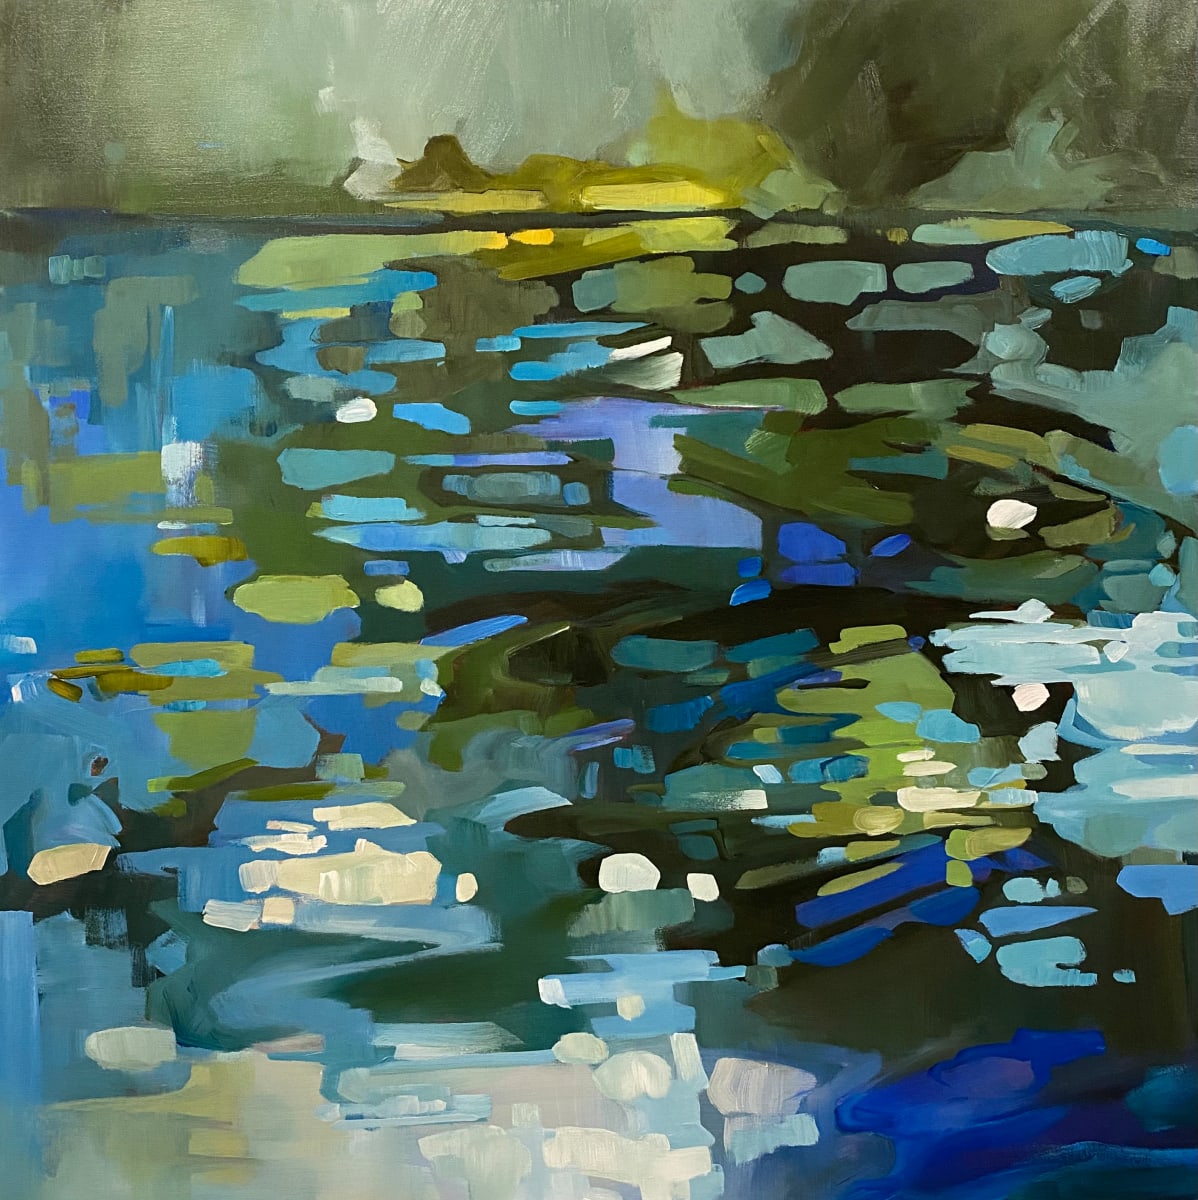 Reflecting on waterlilies by Holly Ann Friesen 